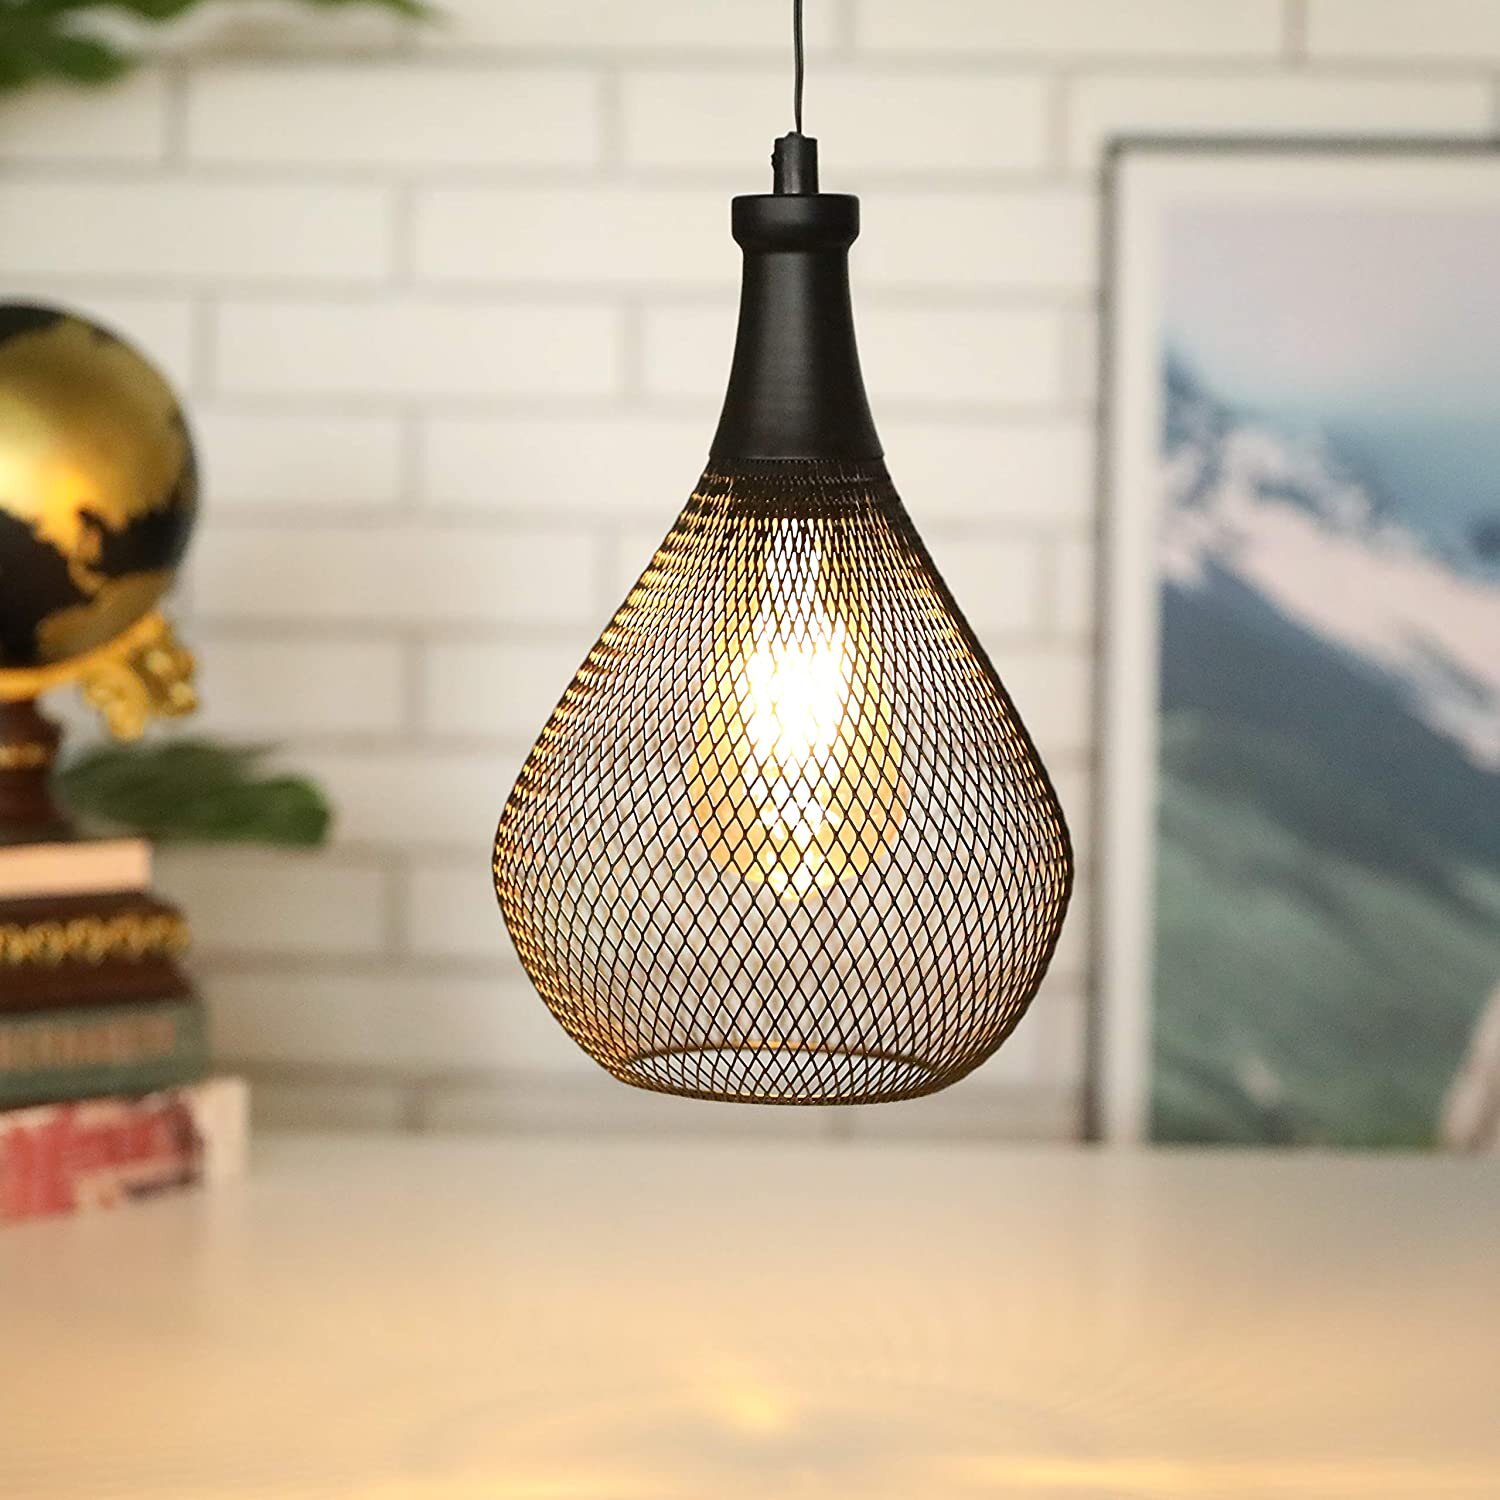 JHY DESIGN 8.7 High Metal Cage Decorative Lamp Battery Powered Cordless Warm White Light with LED Edison Style Bulb.Great for Weddings Parties Patio Events for Indoors/Outdoors 